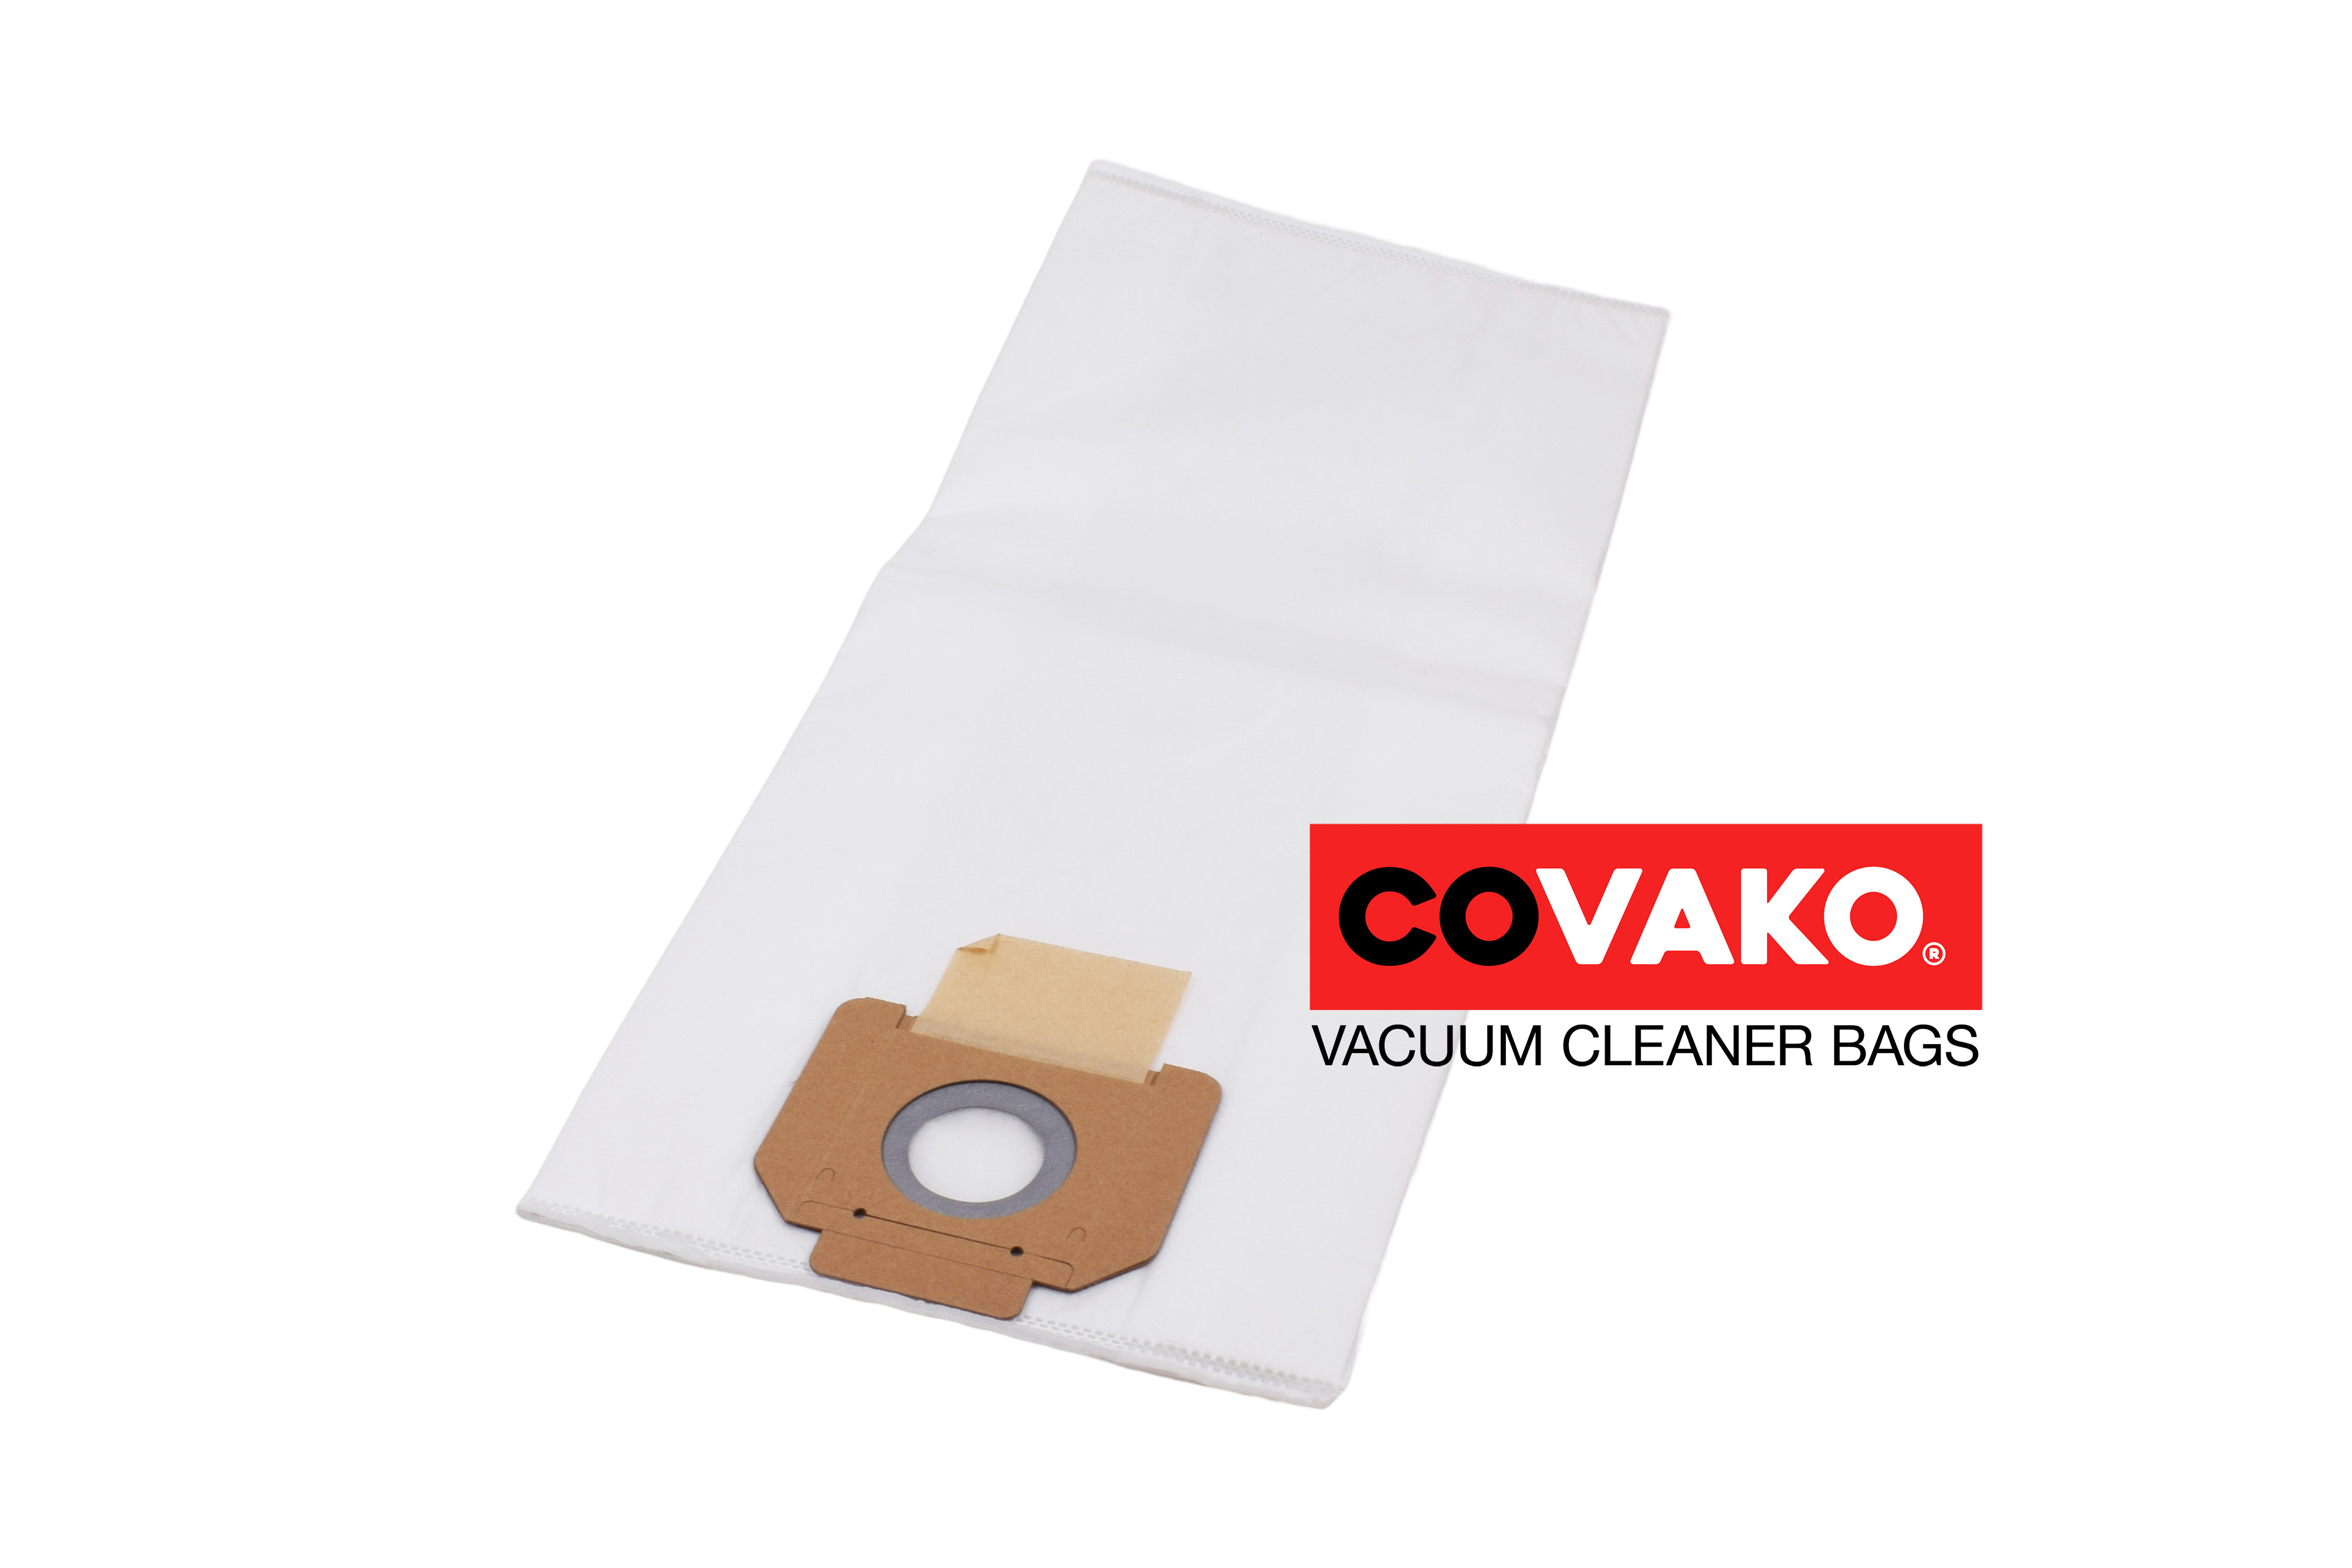 Gansow G 37 EP / Synthesis - Gansow vacuum cleaner bags